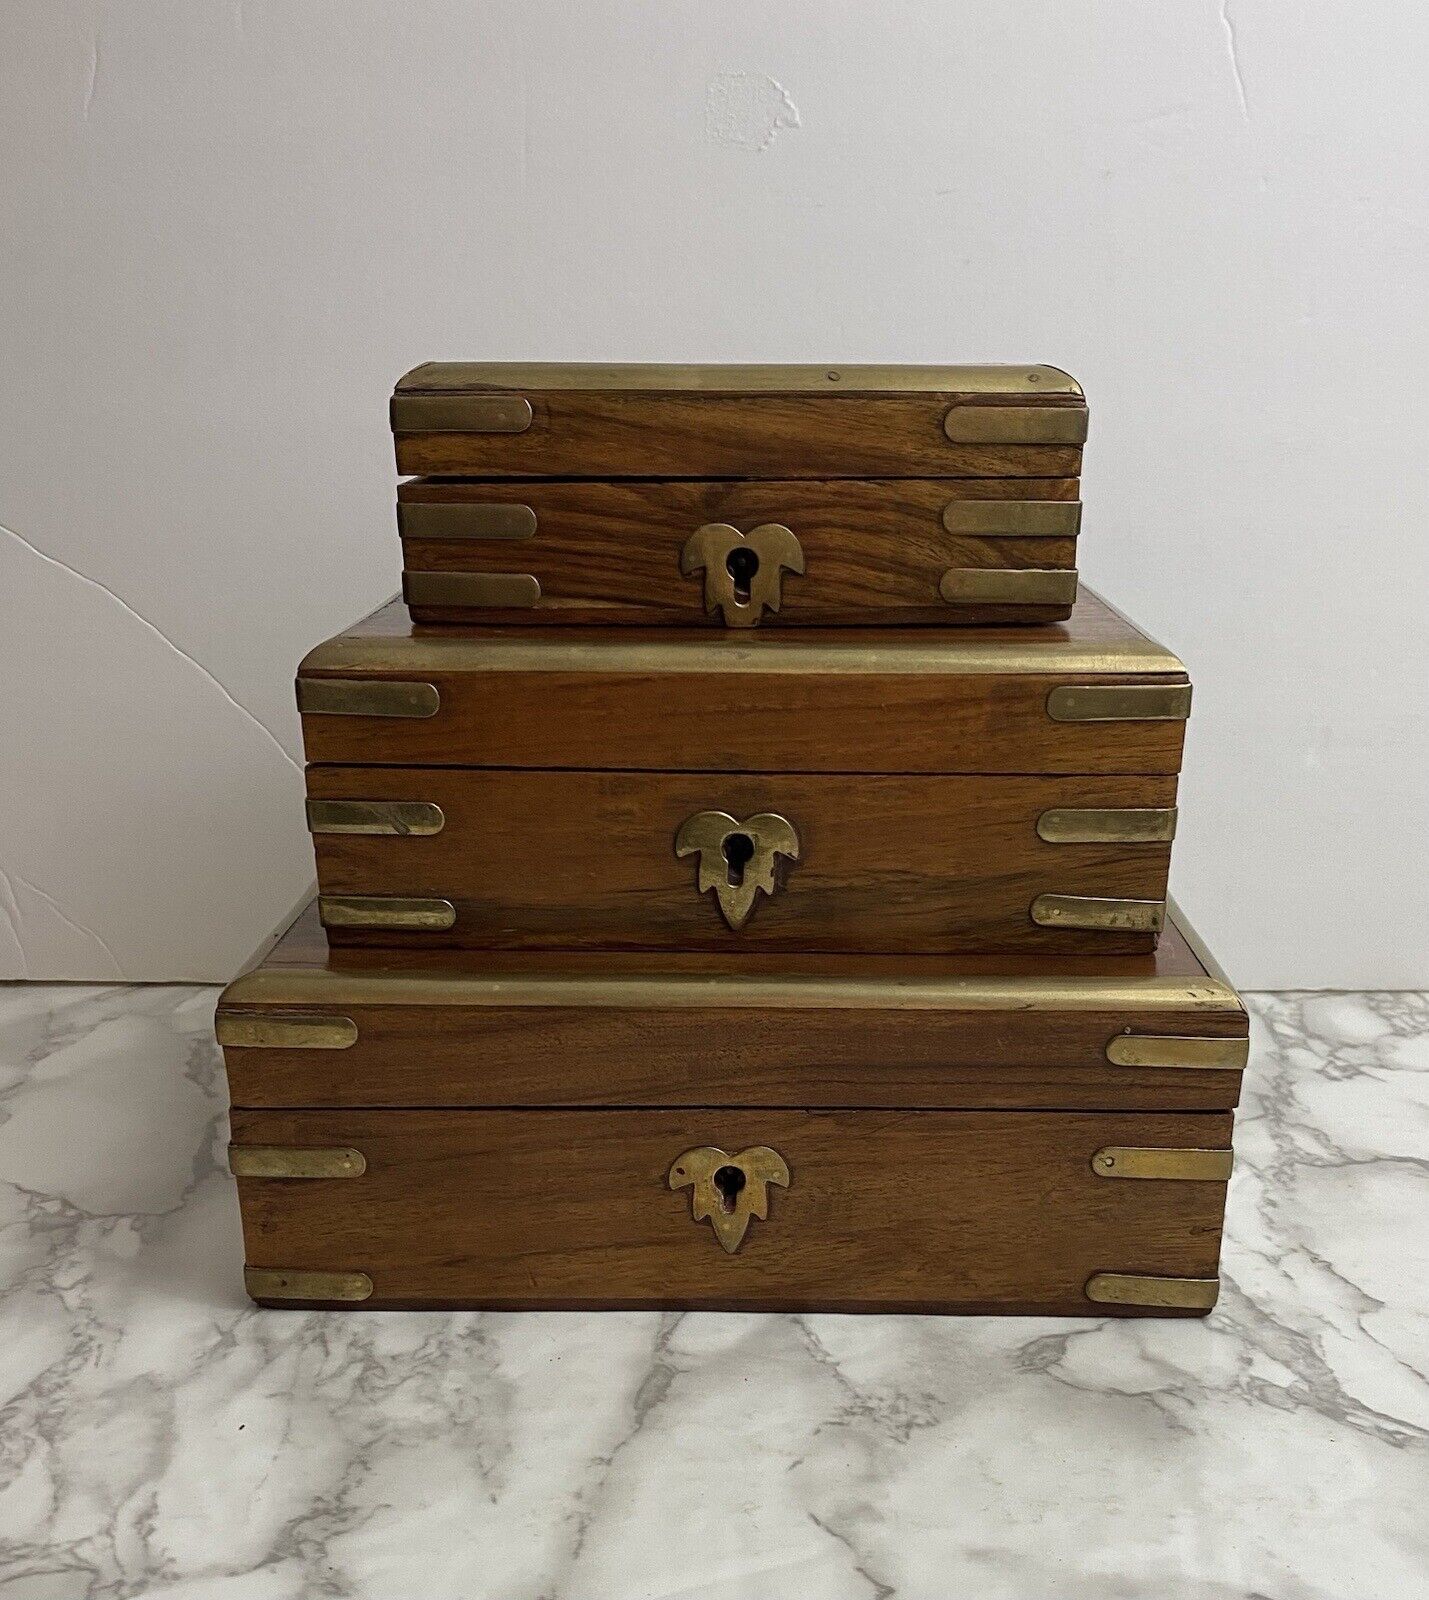 Exquisite Vtg Wooden Nesting / Stackable Trinket Boxes w/ Brass Inlay - Set of 3